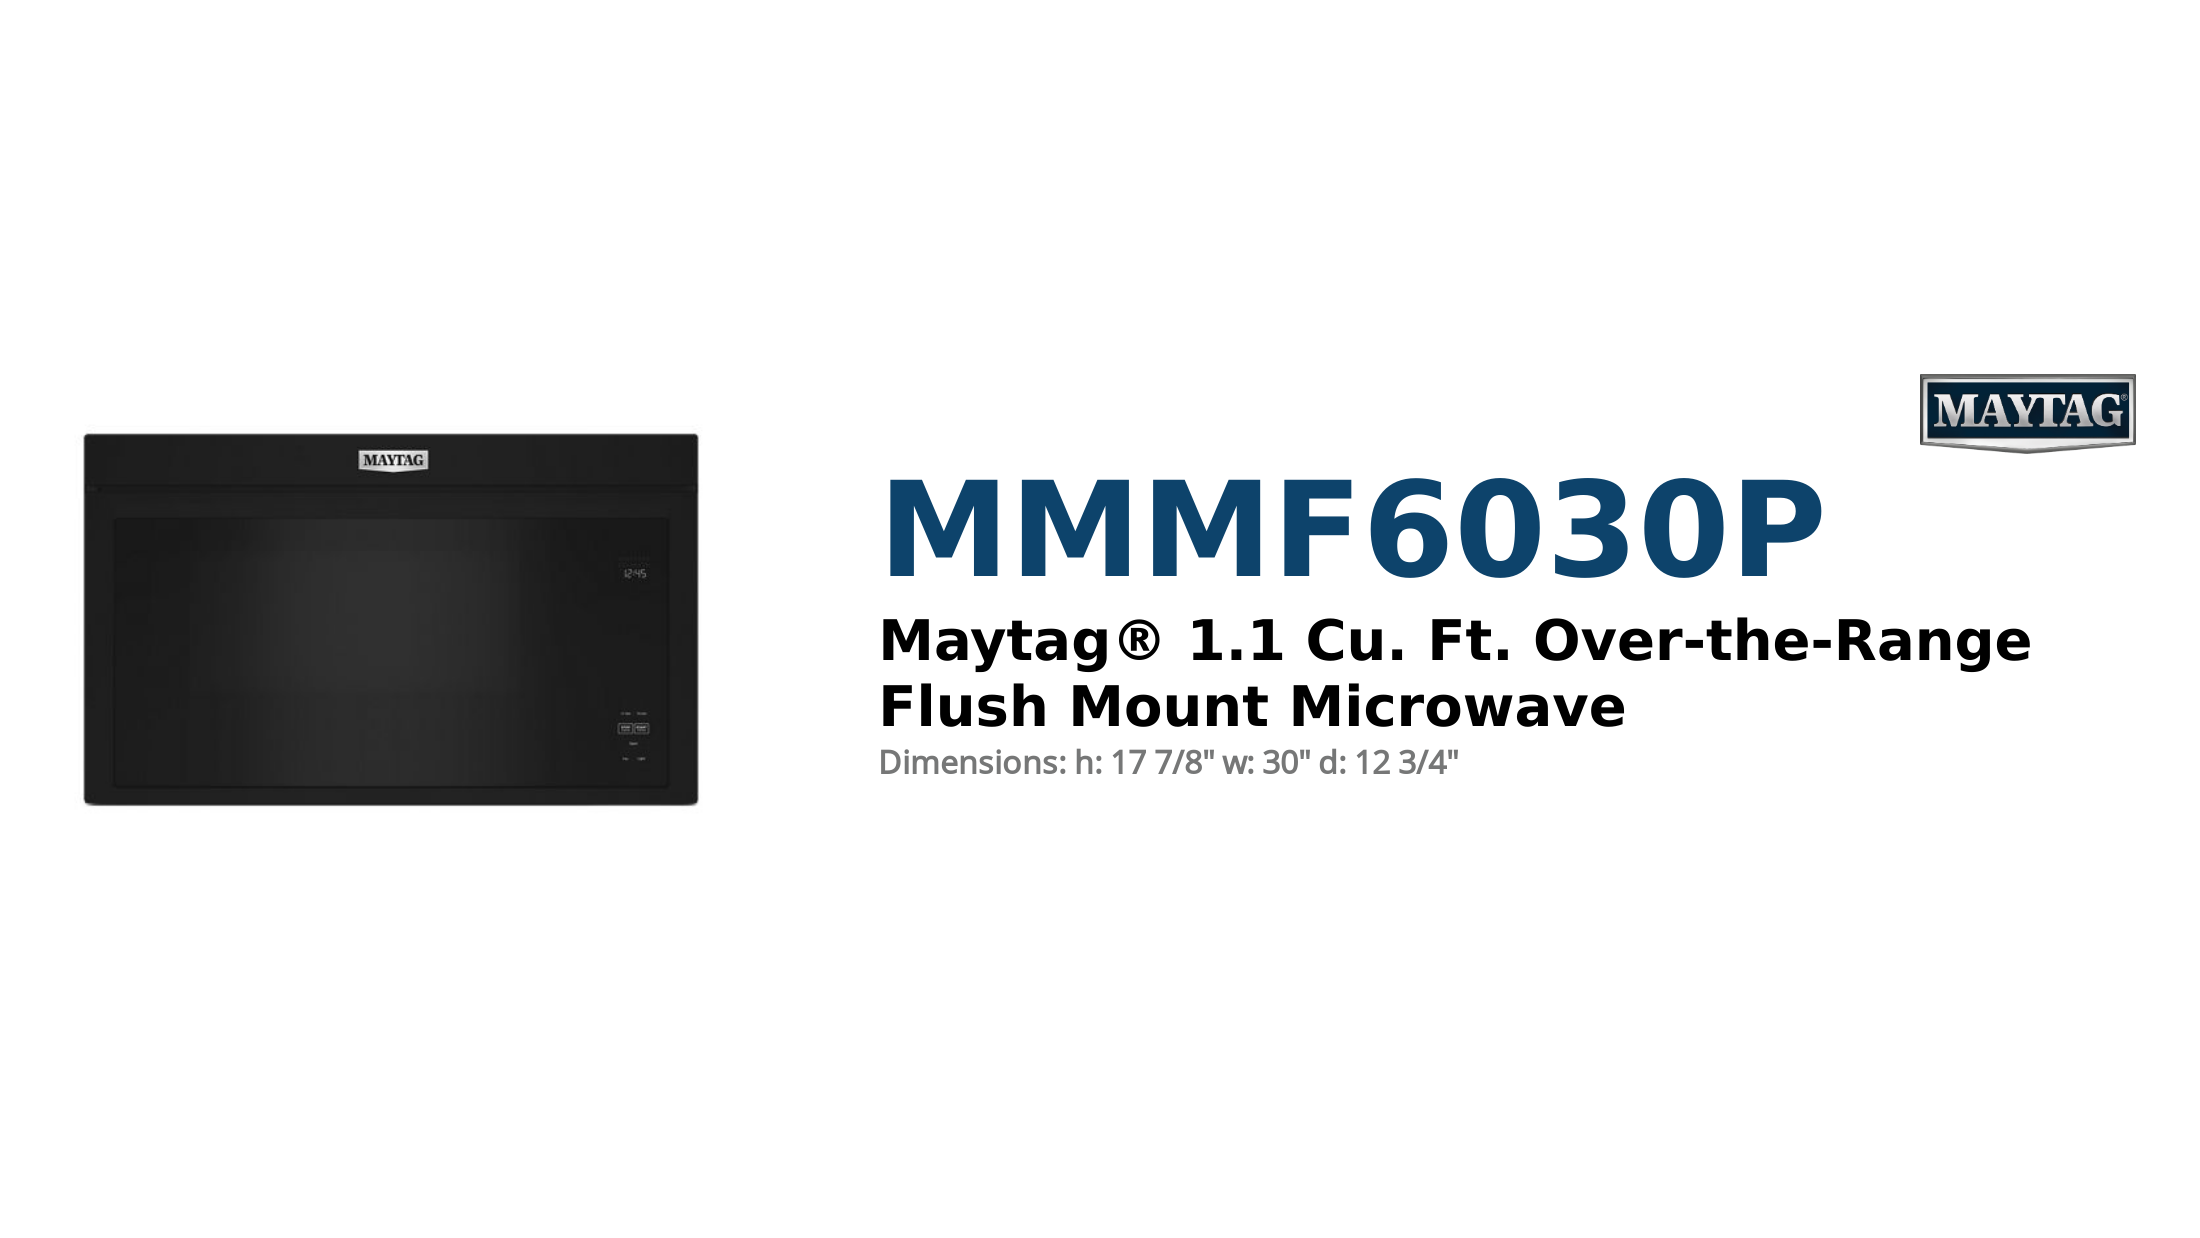 Maytag® 1.1 Cu. Ft. Over-the-Range Flush Mount Microwave